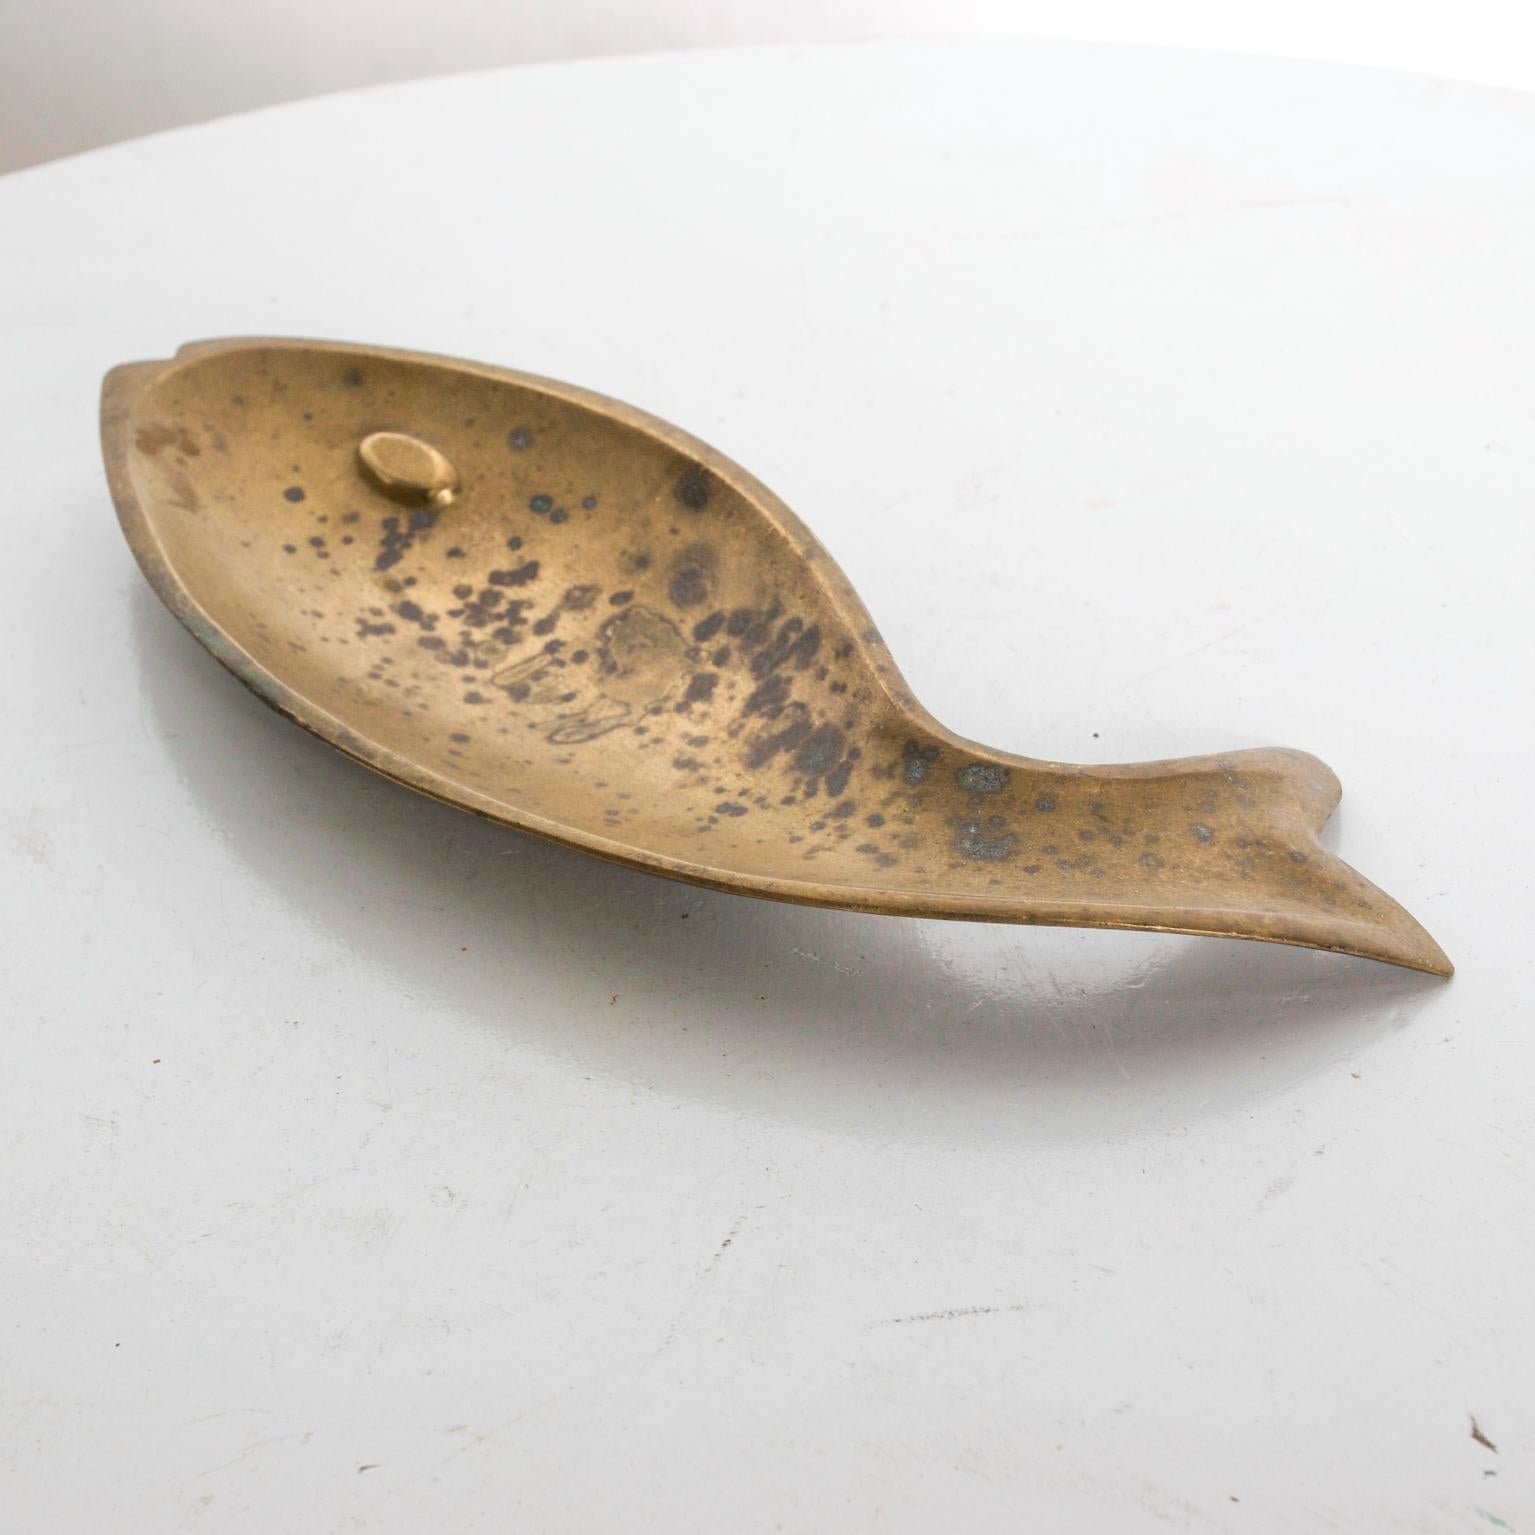 For your pleasure Mid-Century Modern brass ashtray fish figure from Israel.
Dimensions are: 9